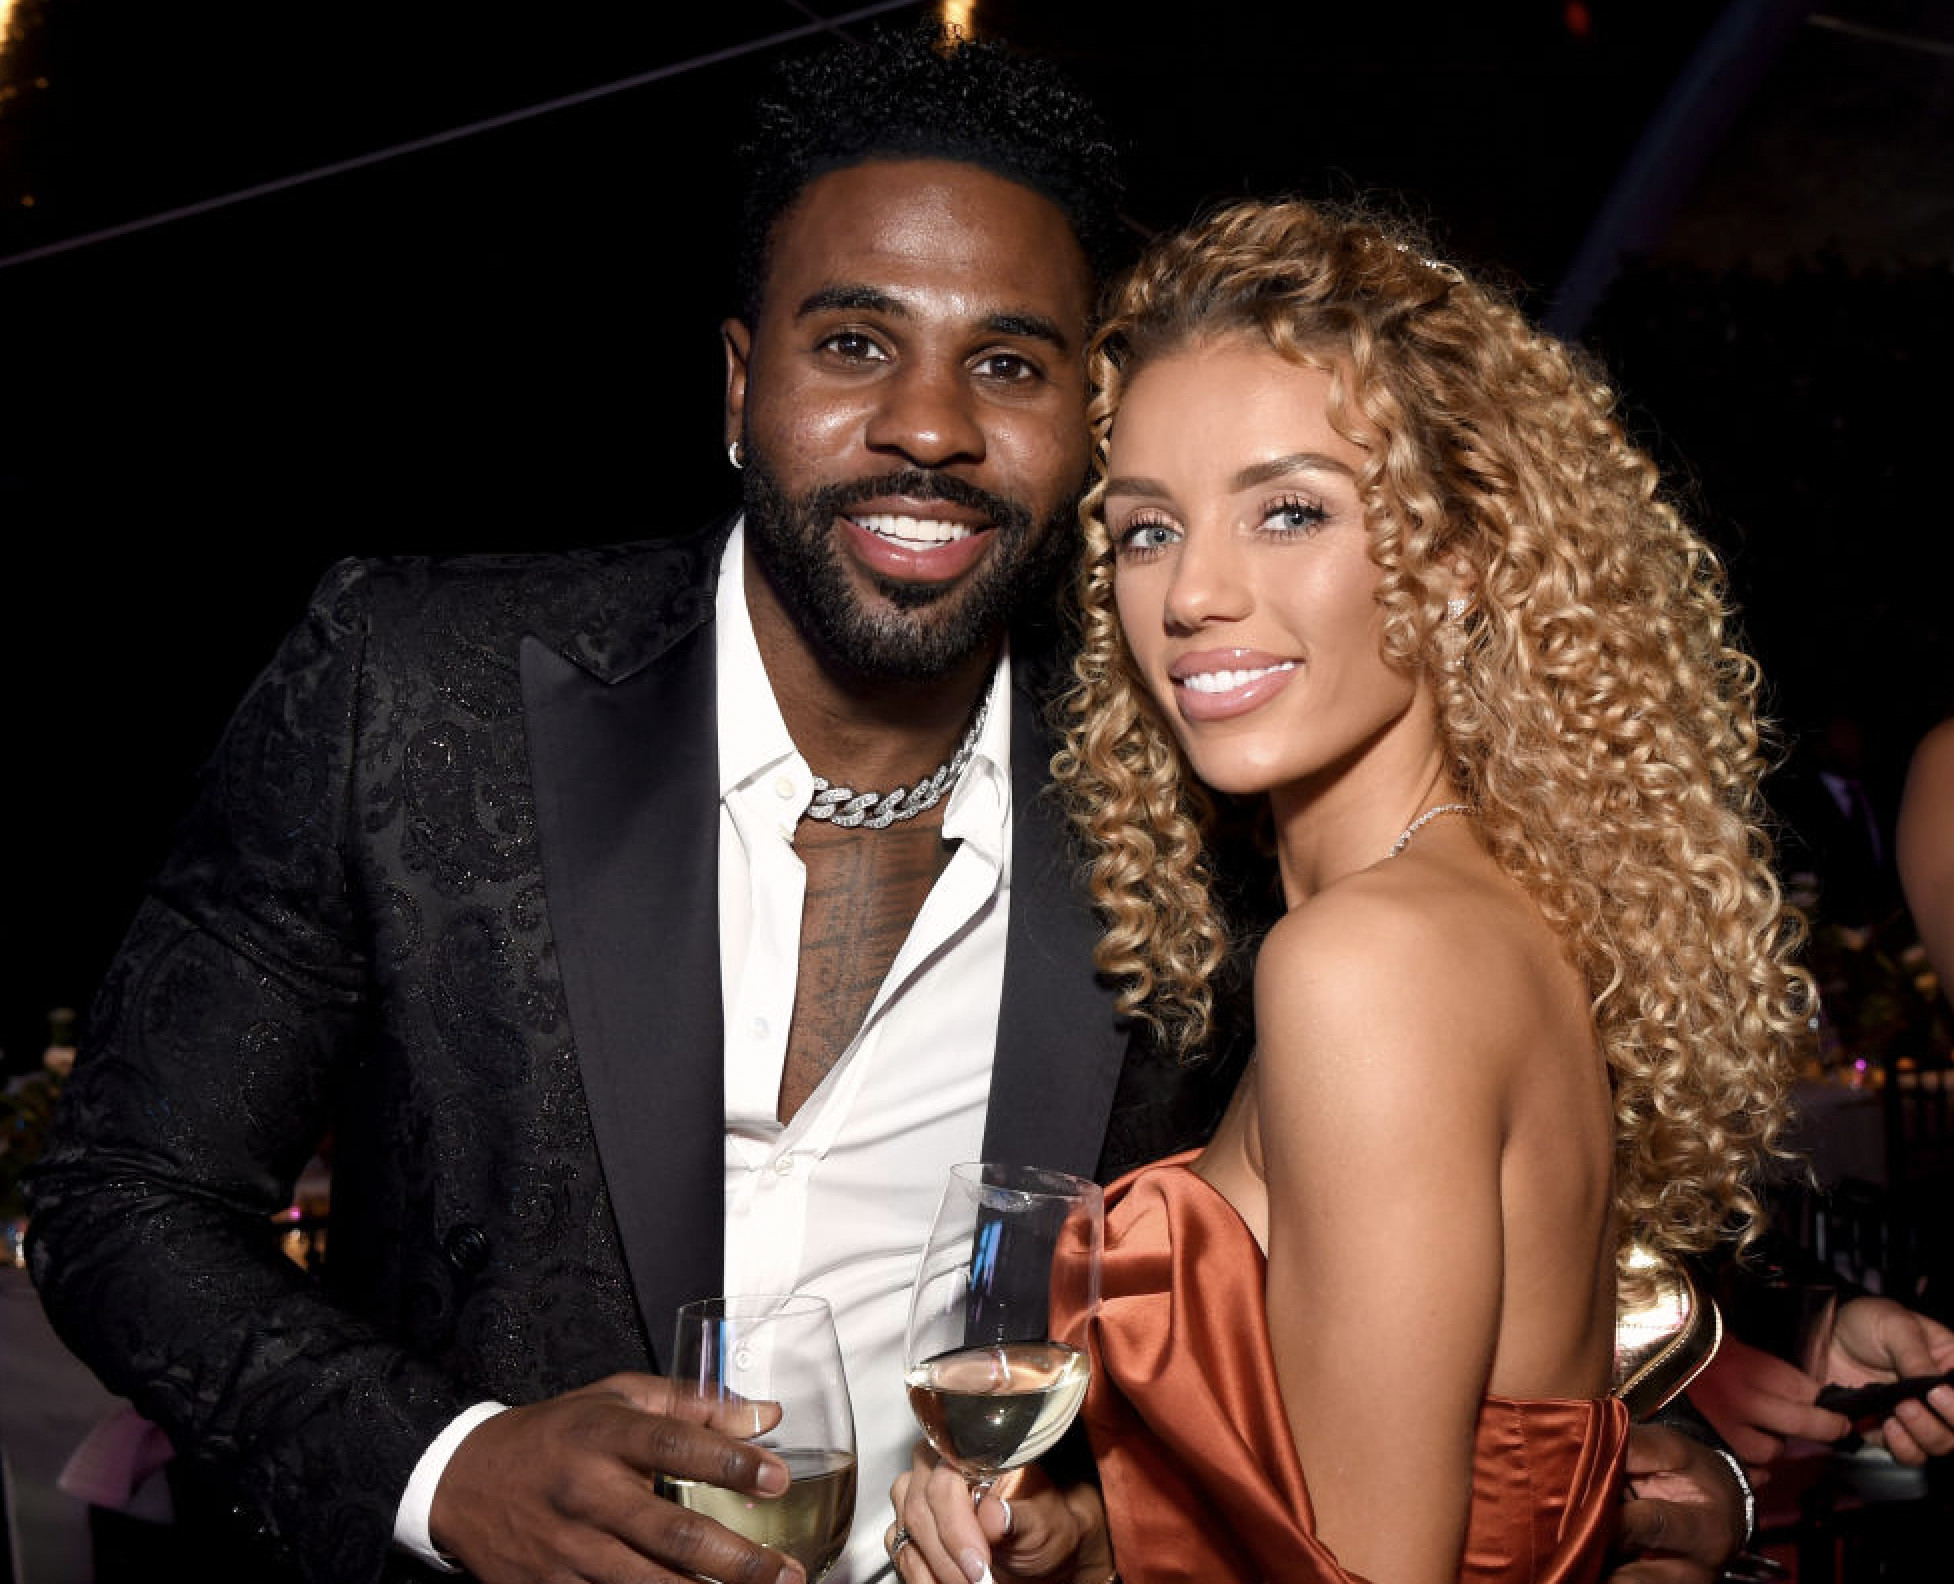 Jena Frumes Says She Was “Constantly” Cheated On By Ex Jason Derulo